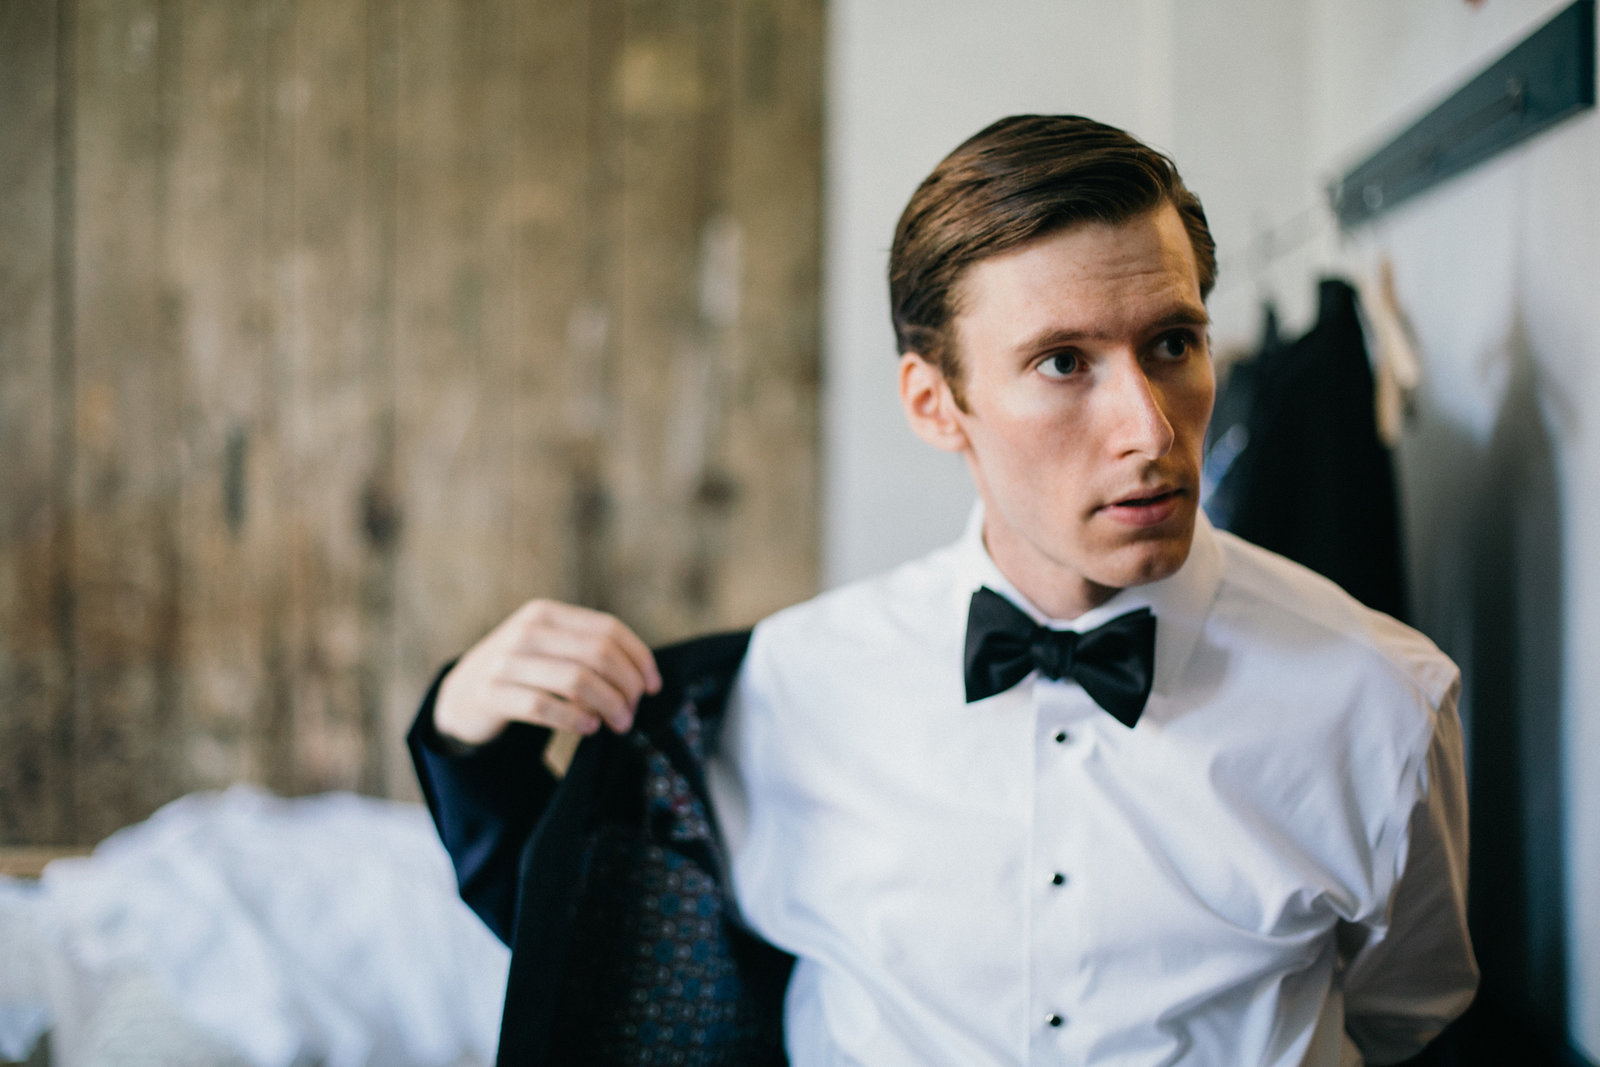 Handsome groom photographed getting ready at Lokal Hotel before the wedding ceremony.